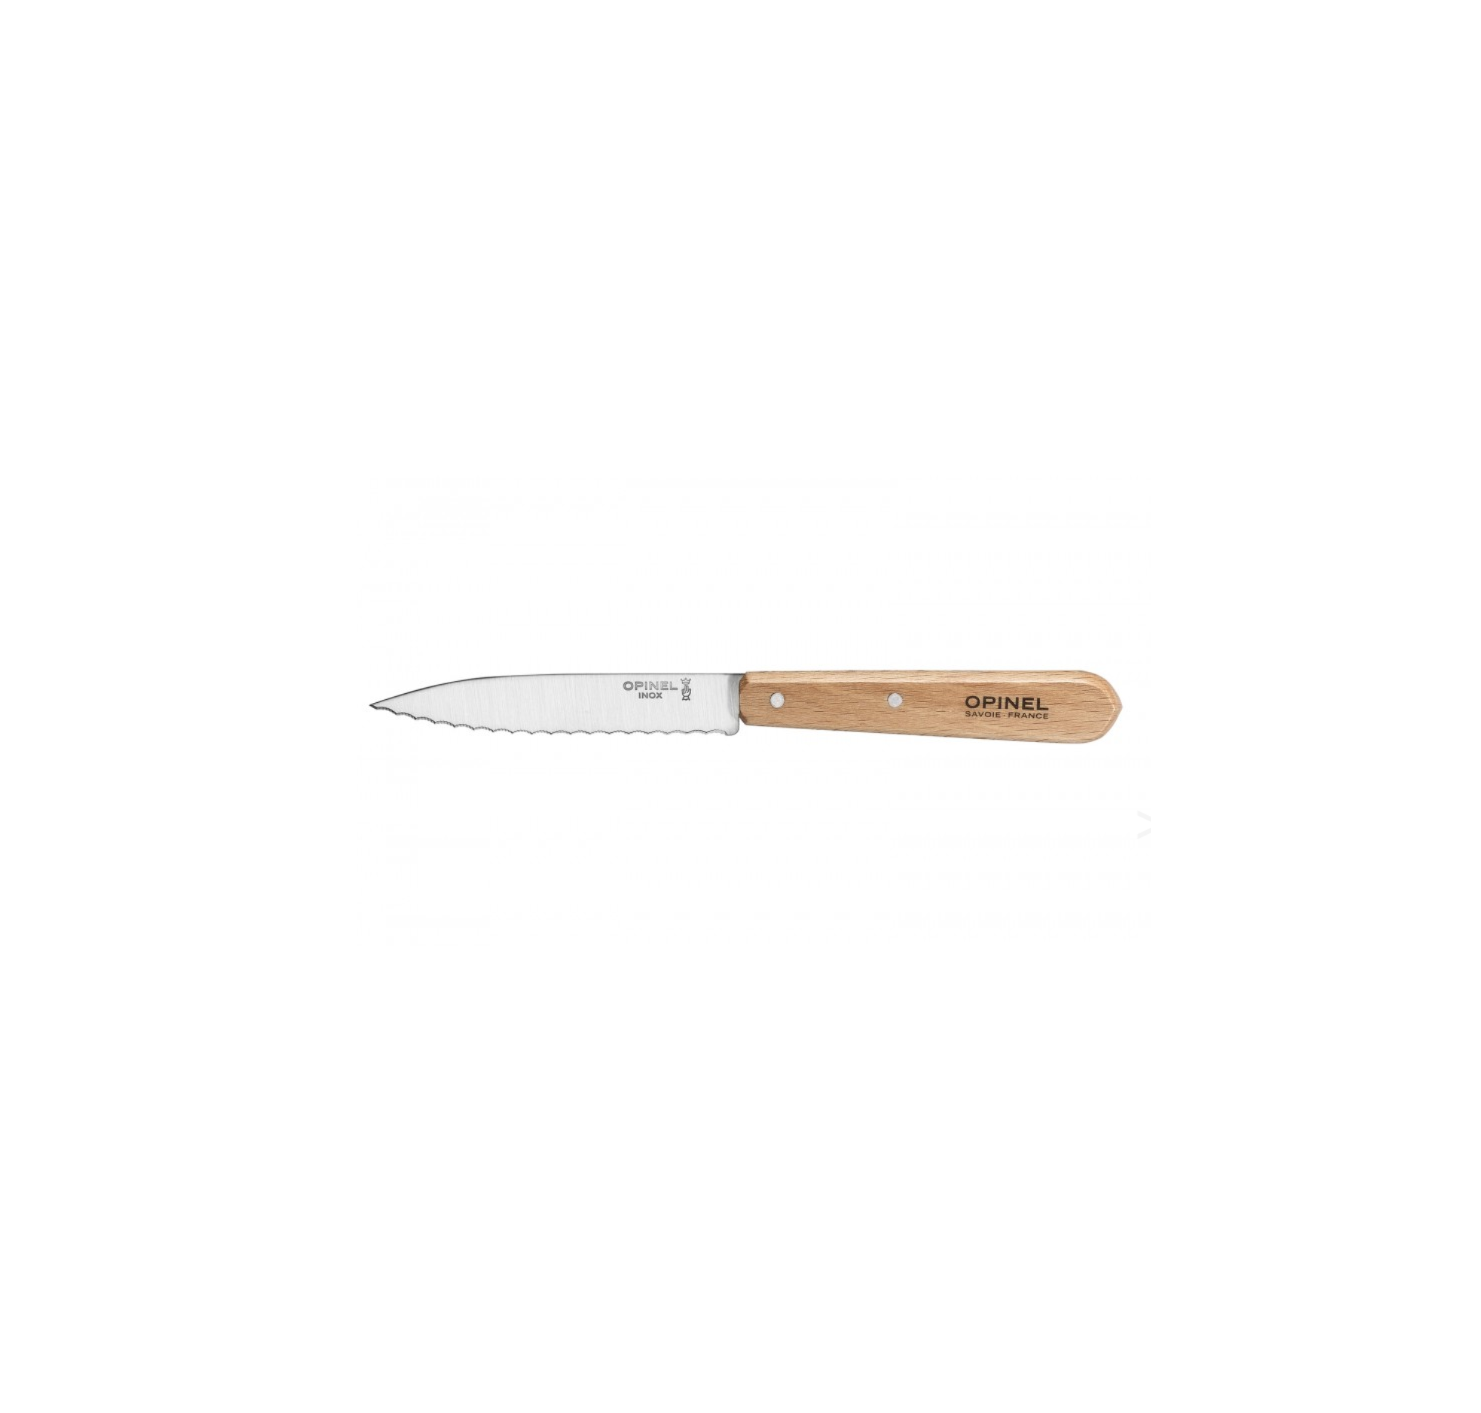 OPINEL 113 COUTEAU CRANTE NATURE INOX HOOD COUPE DECOUPE CUISINE 3123840019180 HOME COOKING KITCHEN NATURE INOX HOOD COMASOUND KARTEL CSK ONLINE